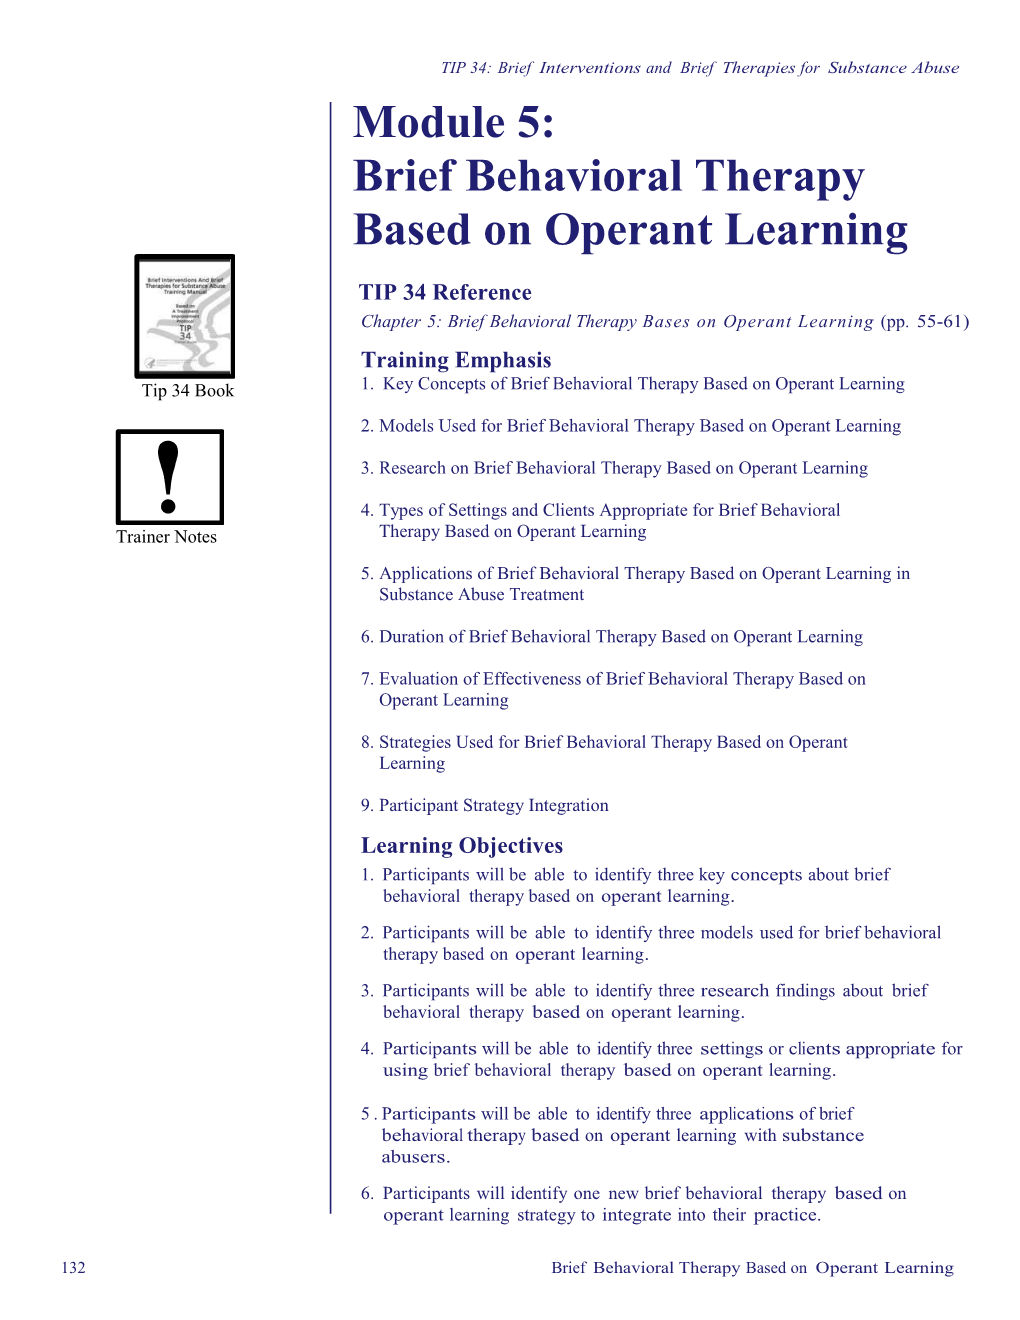 Brief Behavioral Therapy Based on Operantlearning